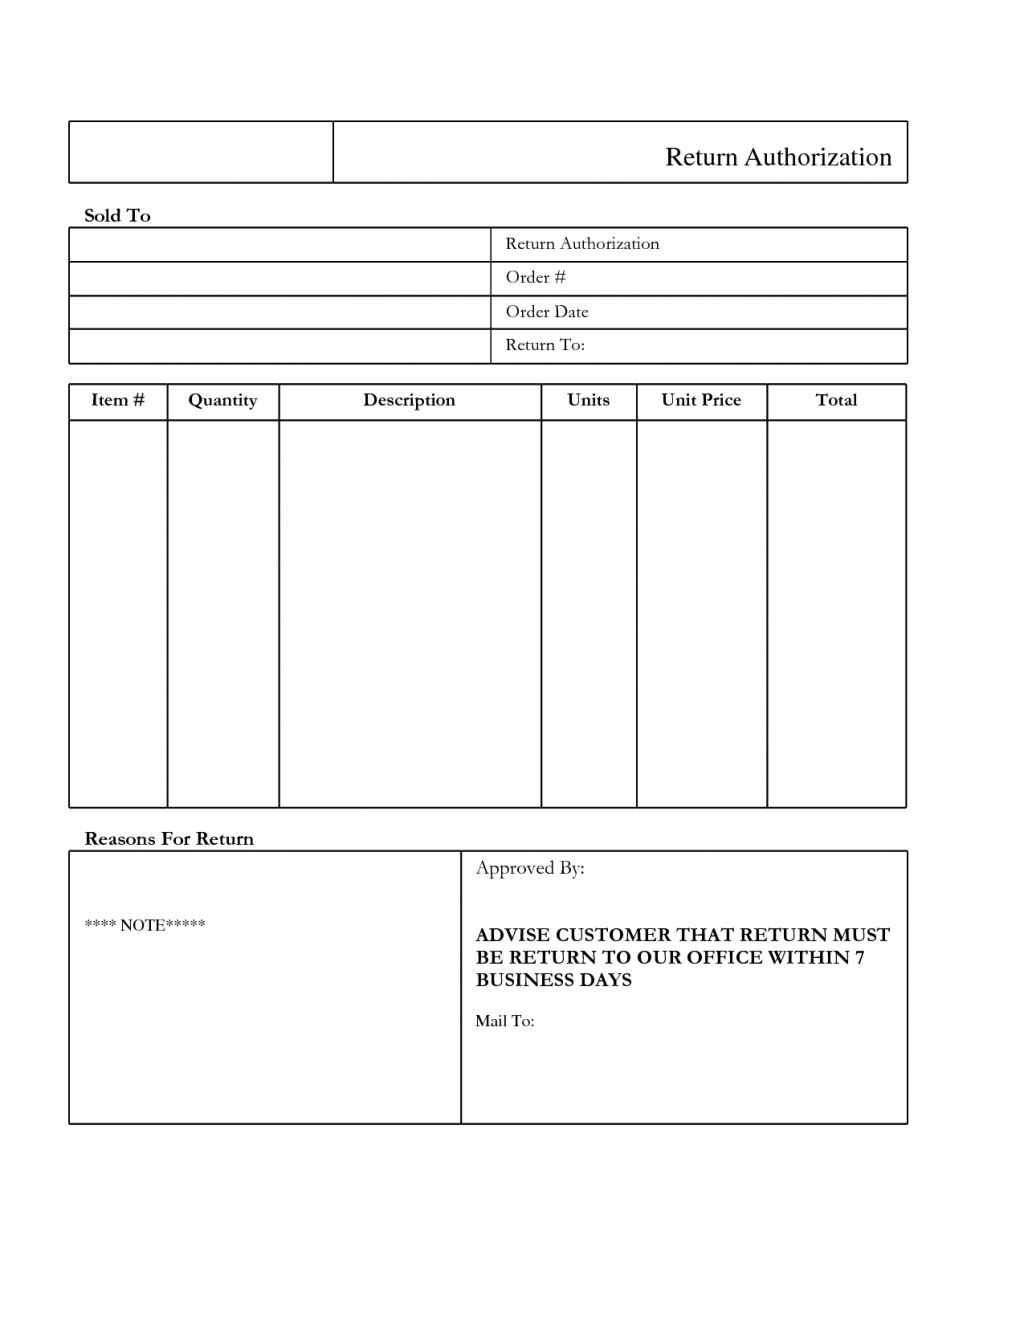 Rma Formation Formula Format Download Form Pdf Making Home For Rma Report Template